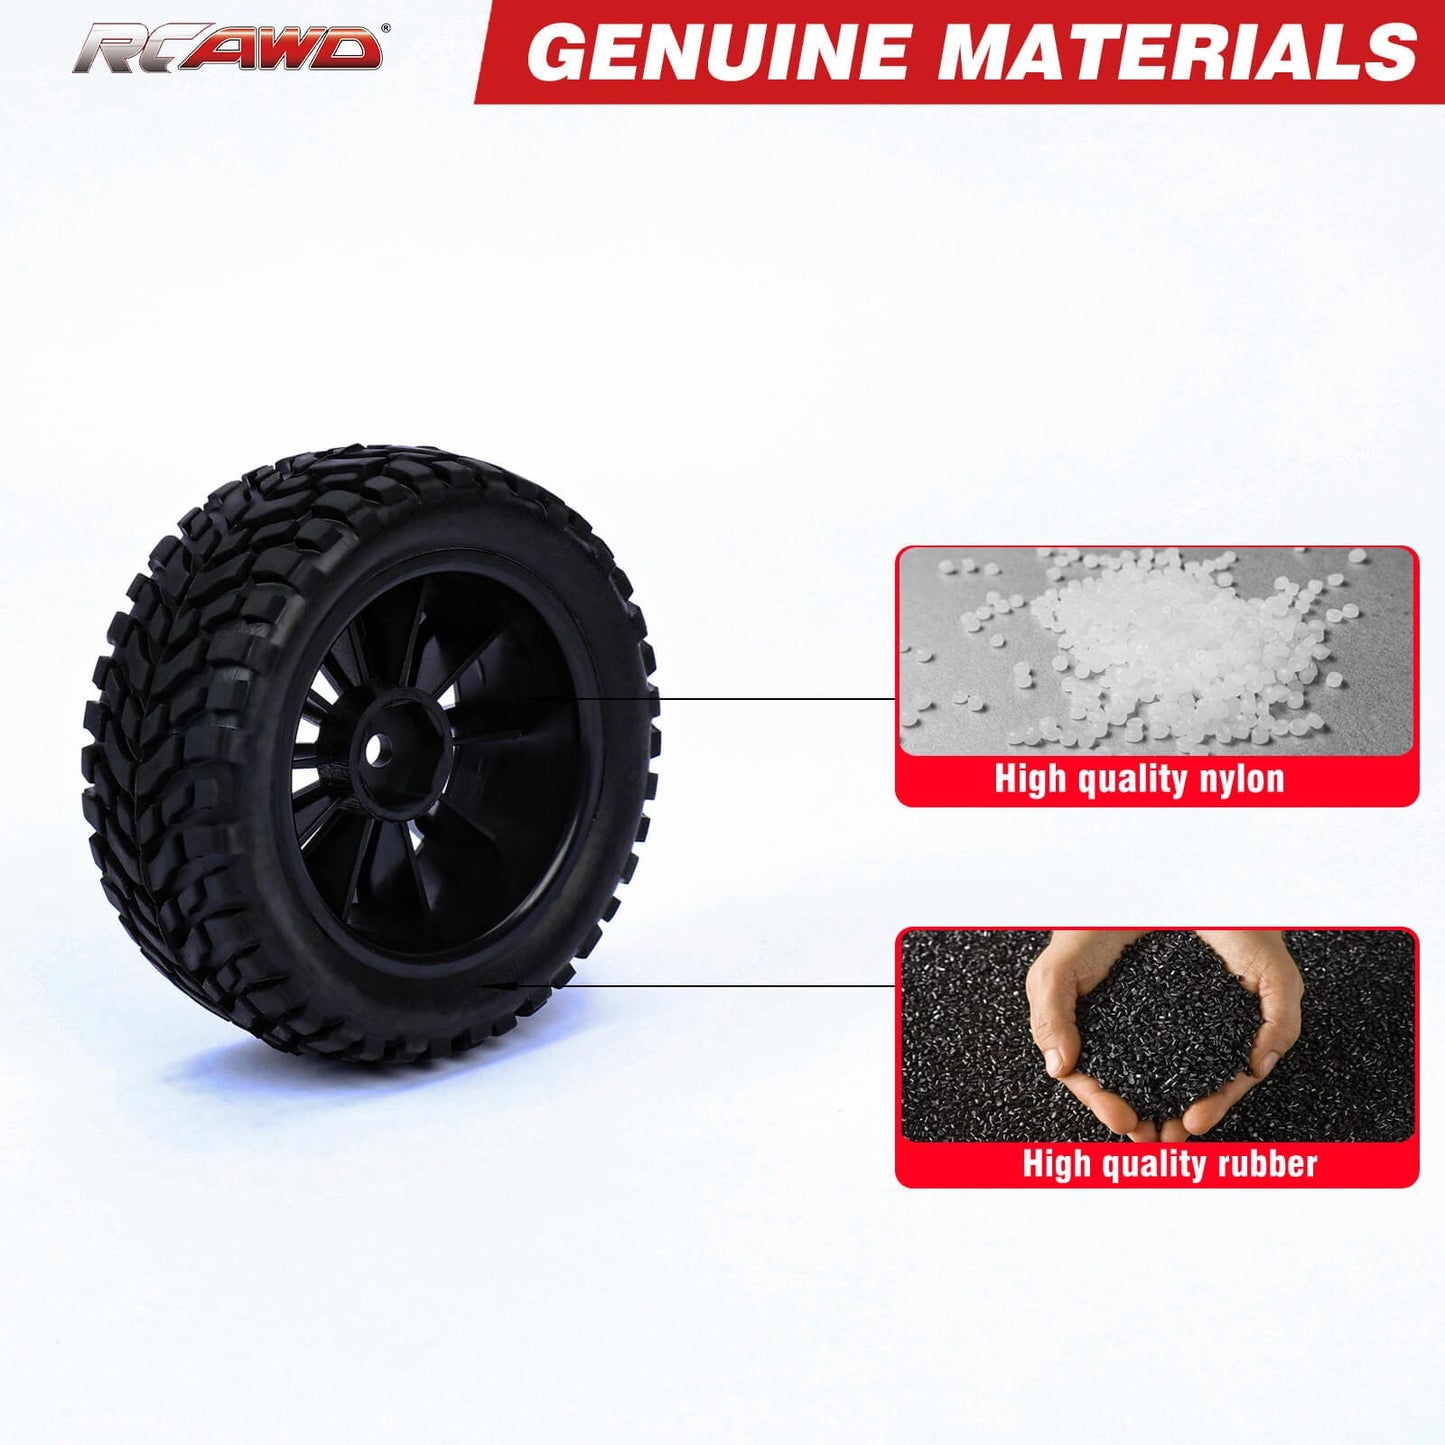 RCAWD Amazon RC Wheel & Tires 1/10 Pre-glued RC High-speed Off-road Truck Wheel Tires LG-021BL LG-022BL